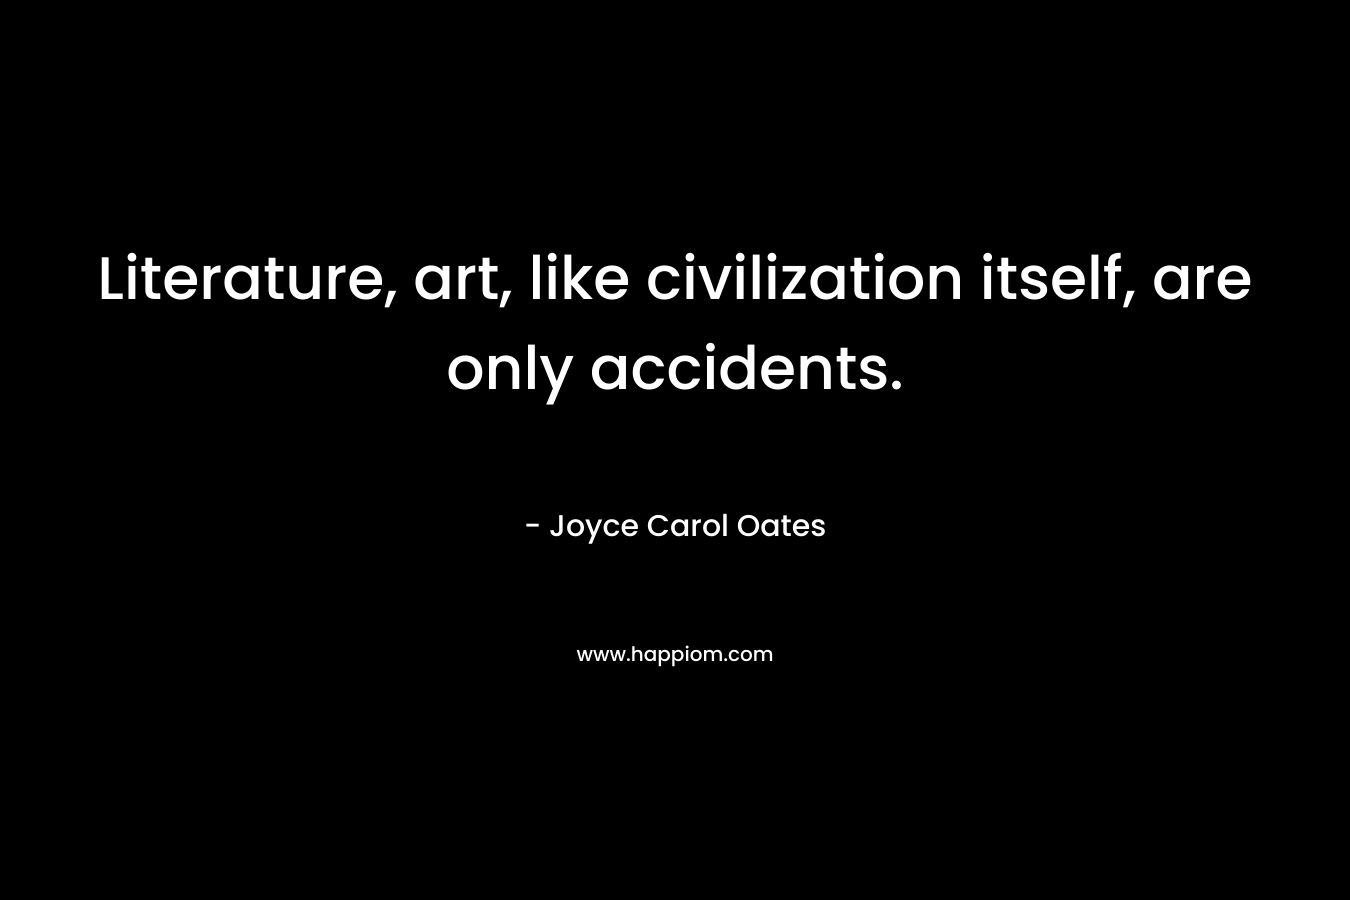 Literature, art, like civilization itself, are only accidents. – Joyce Carol Oates